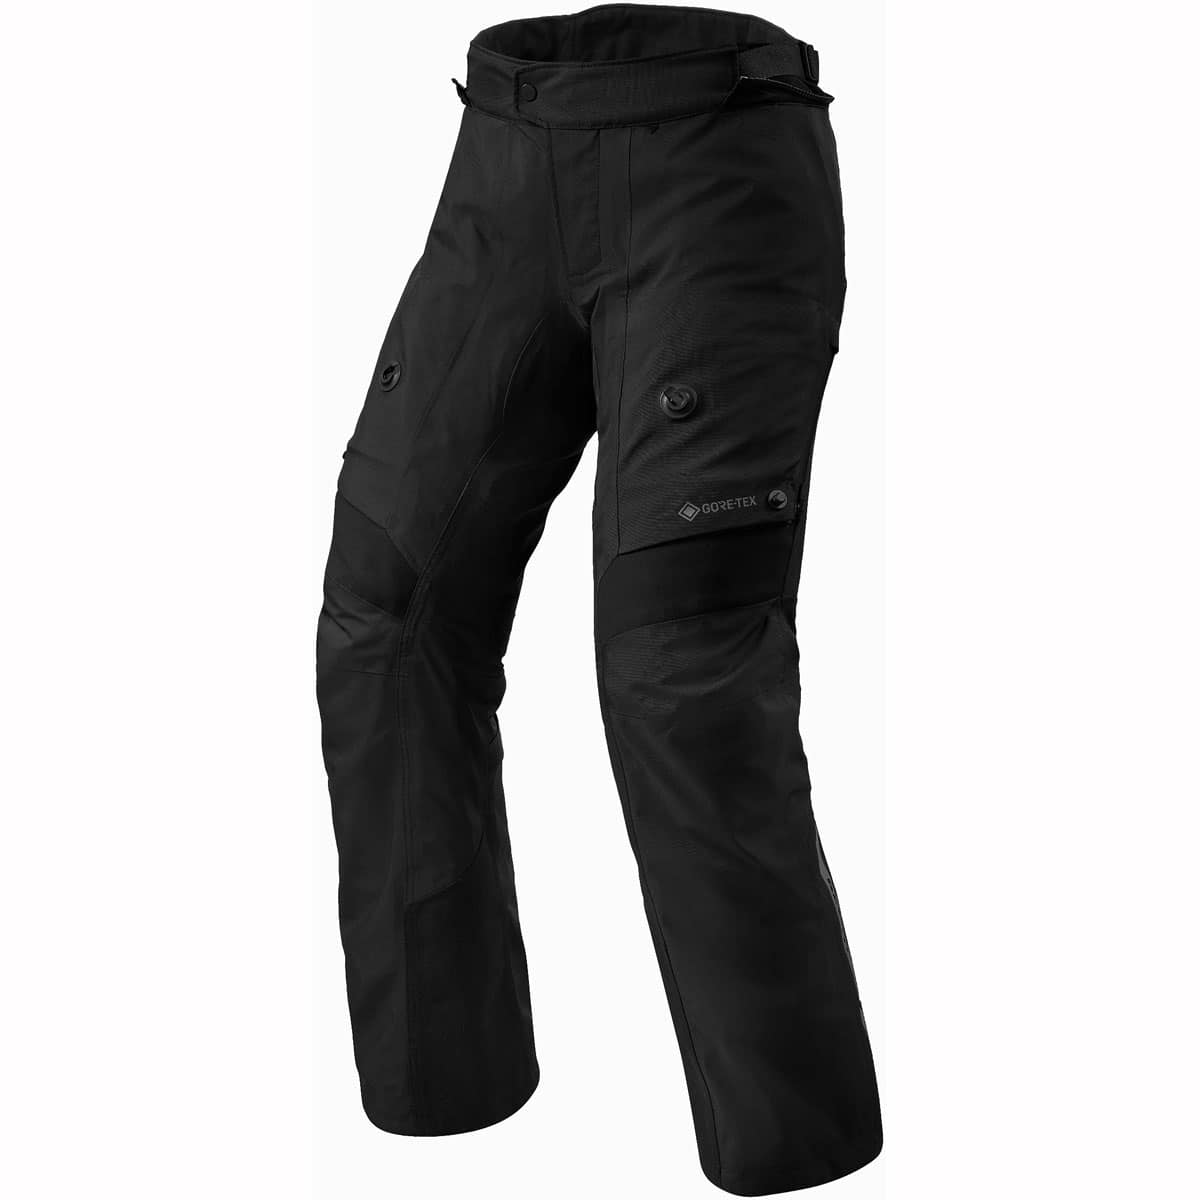 Rev It! Poseidon GTX trousers: AA-rated Gore-Tex laminated motorcycle touring trousers